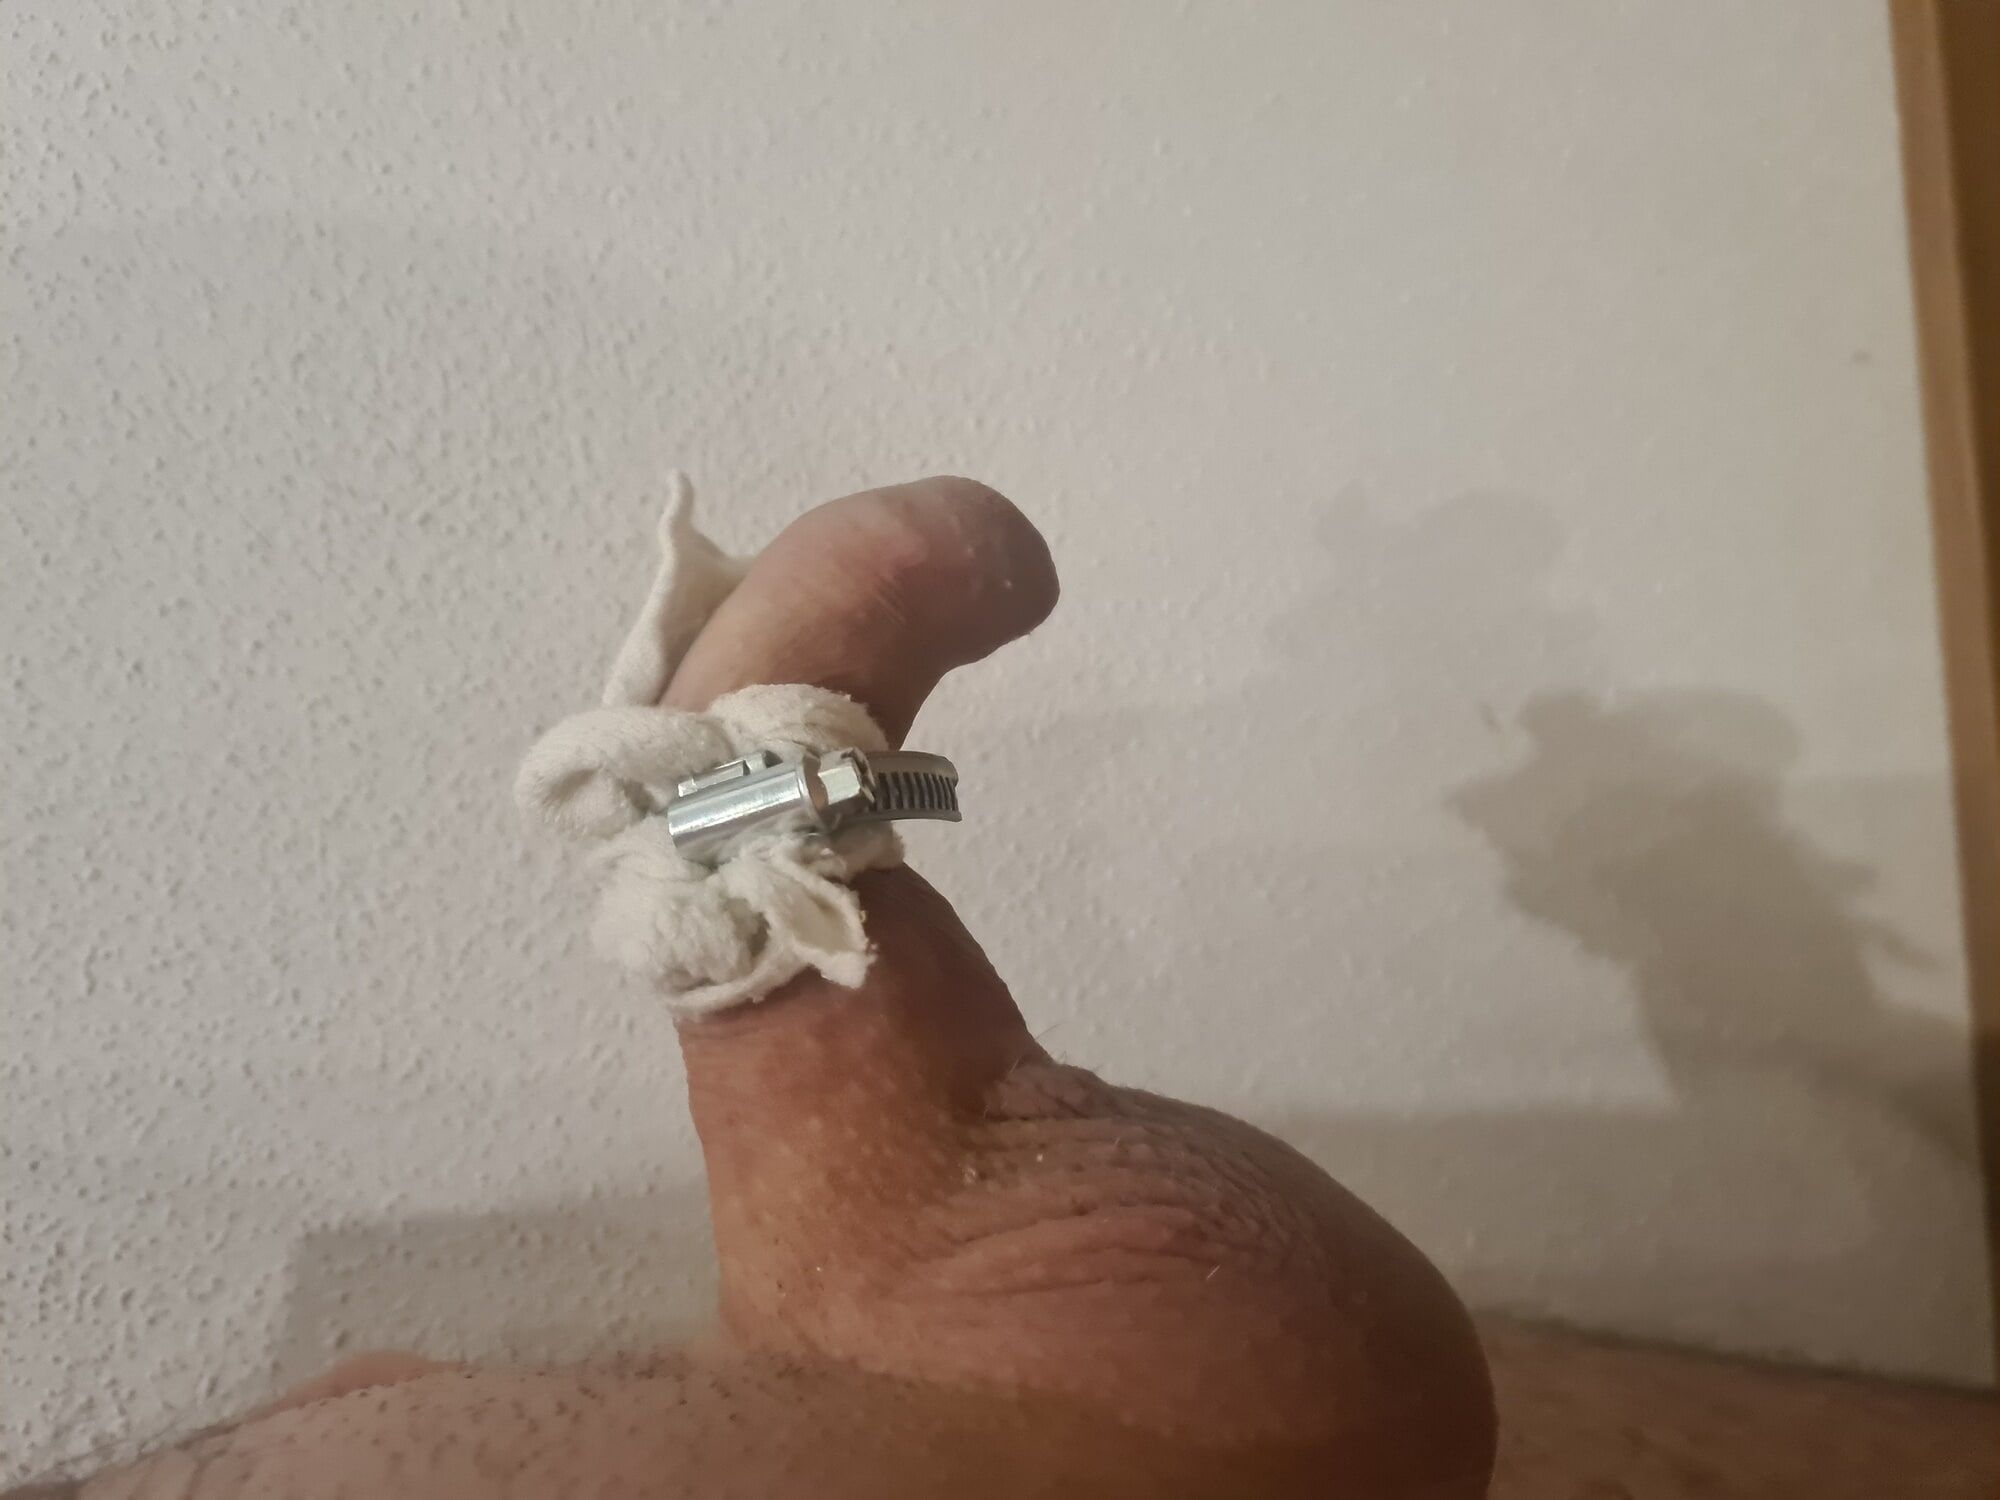 Penis banding session with hoseclamp #15